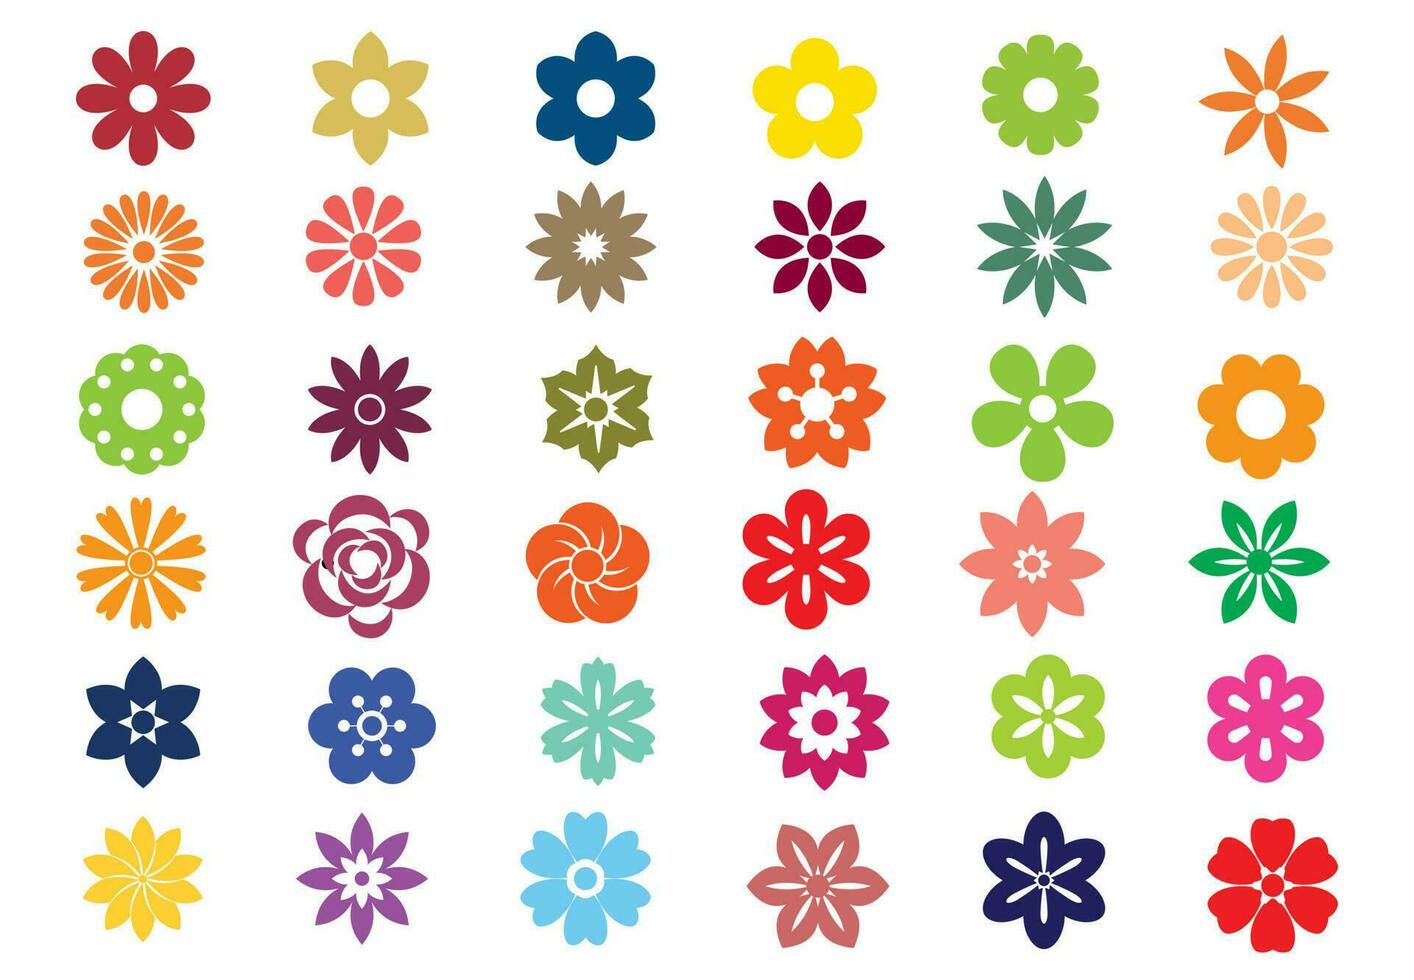 flower icons vector illustration on background